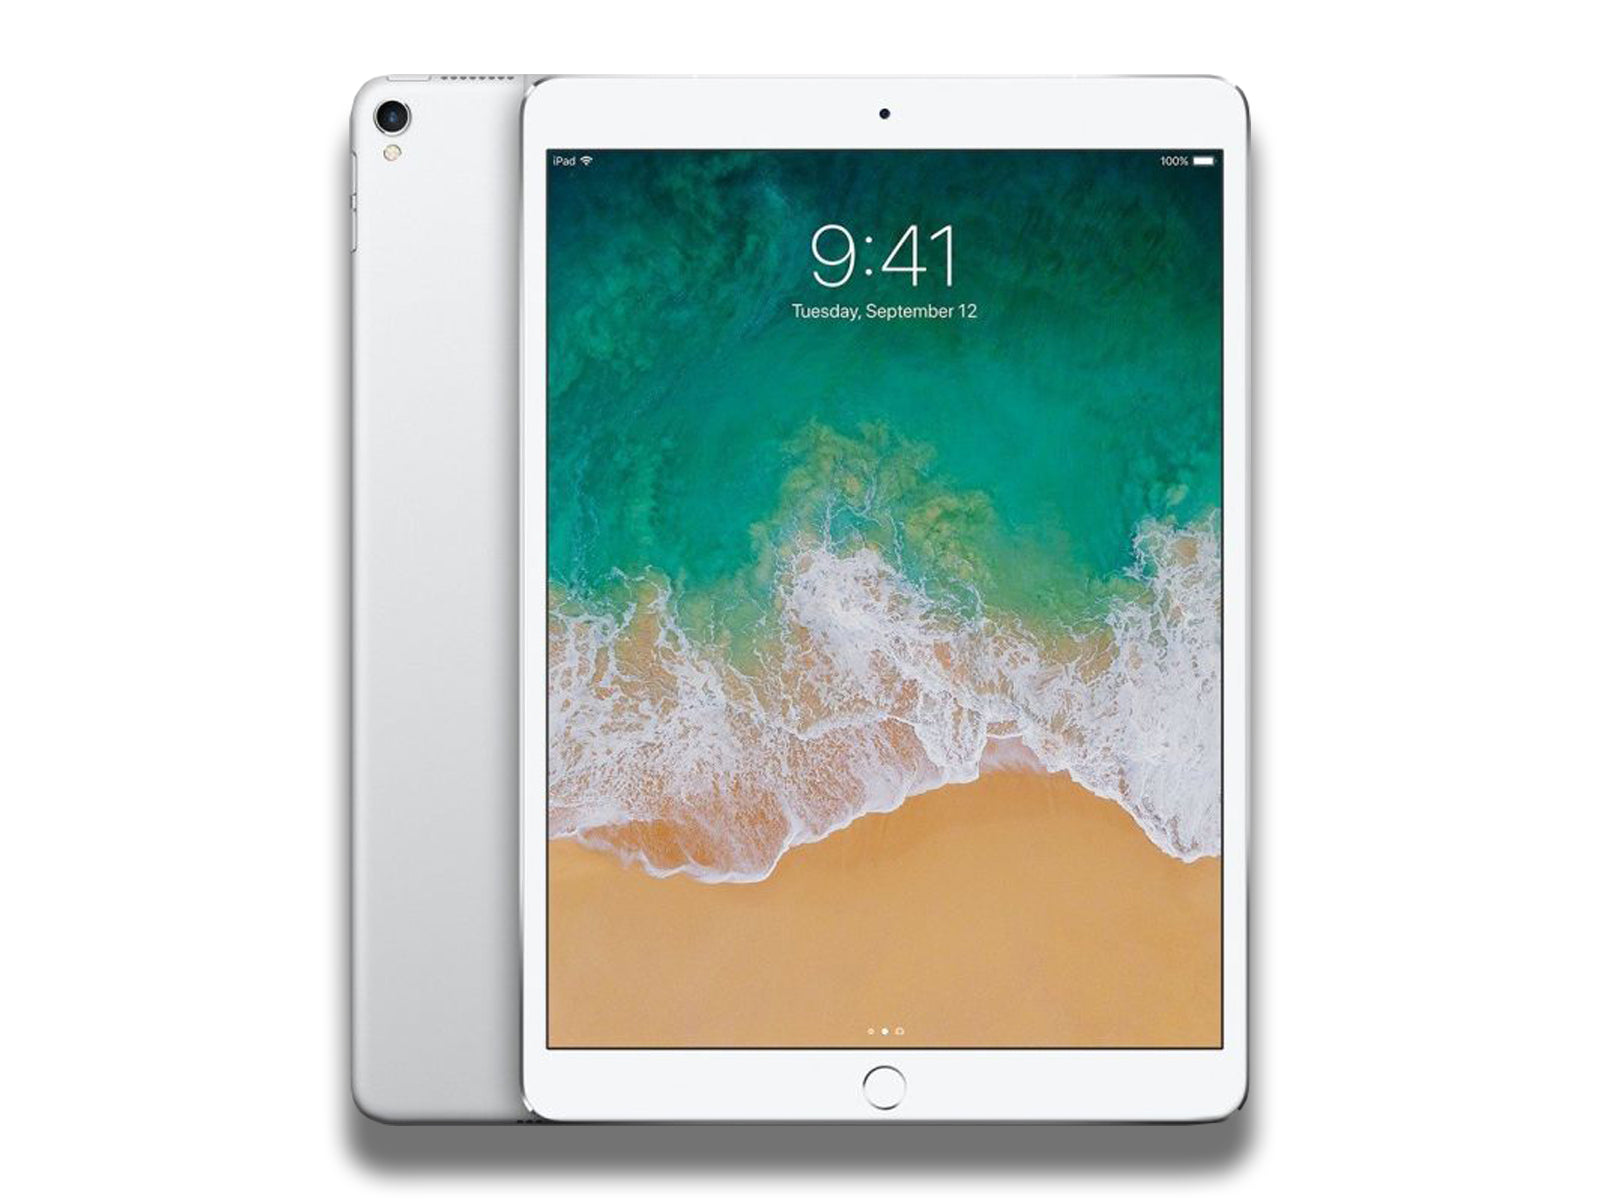 Image shows a front and back view of the silver Apple iPad Pro 10.5-inch 